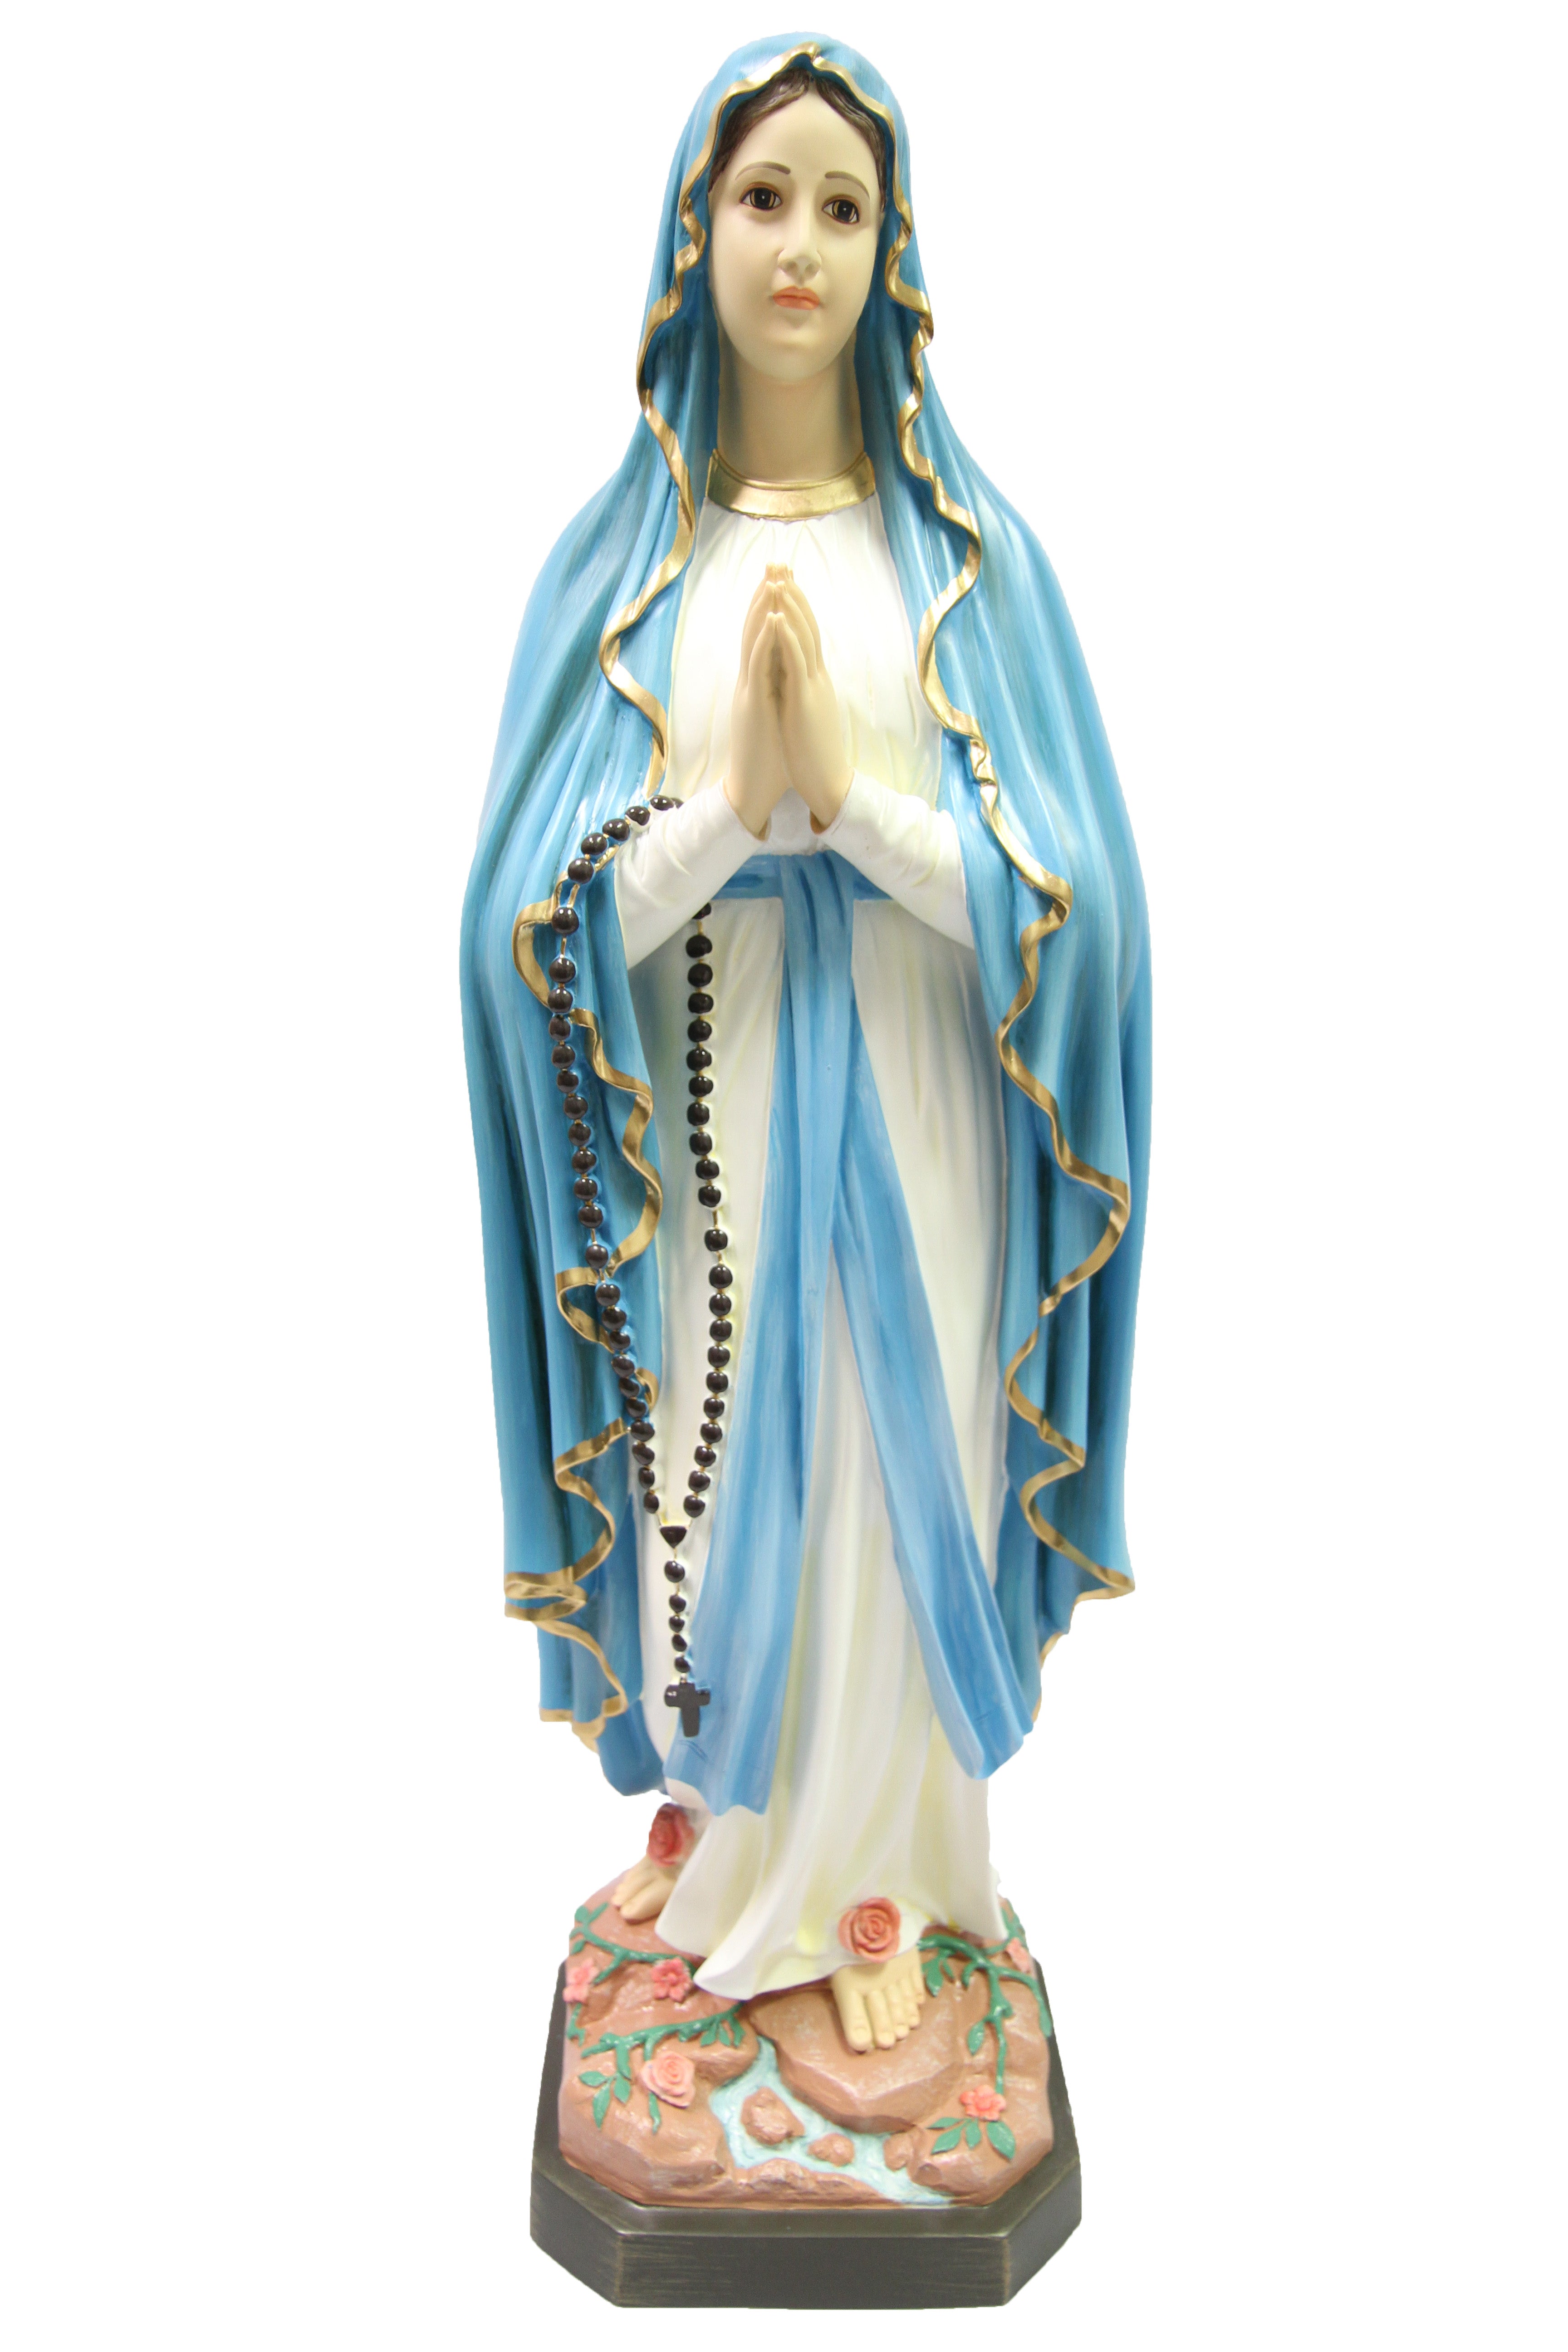 32 Inch Our Lady of Lourdes Virgin Mary Catholic Statue Sculpture Vittoria Collection Made in Italy Indoor Outdoor